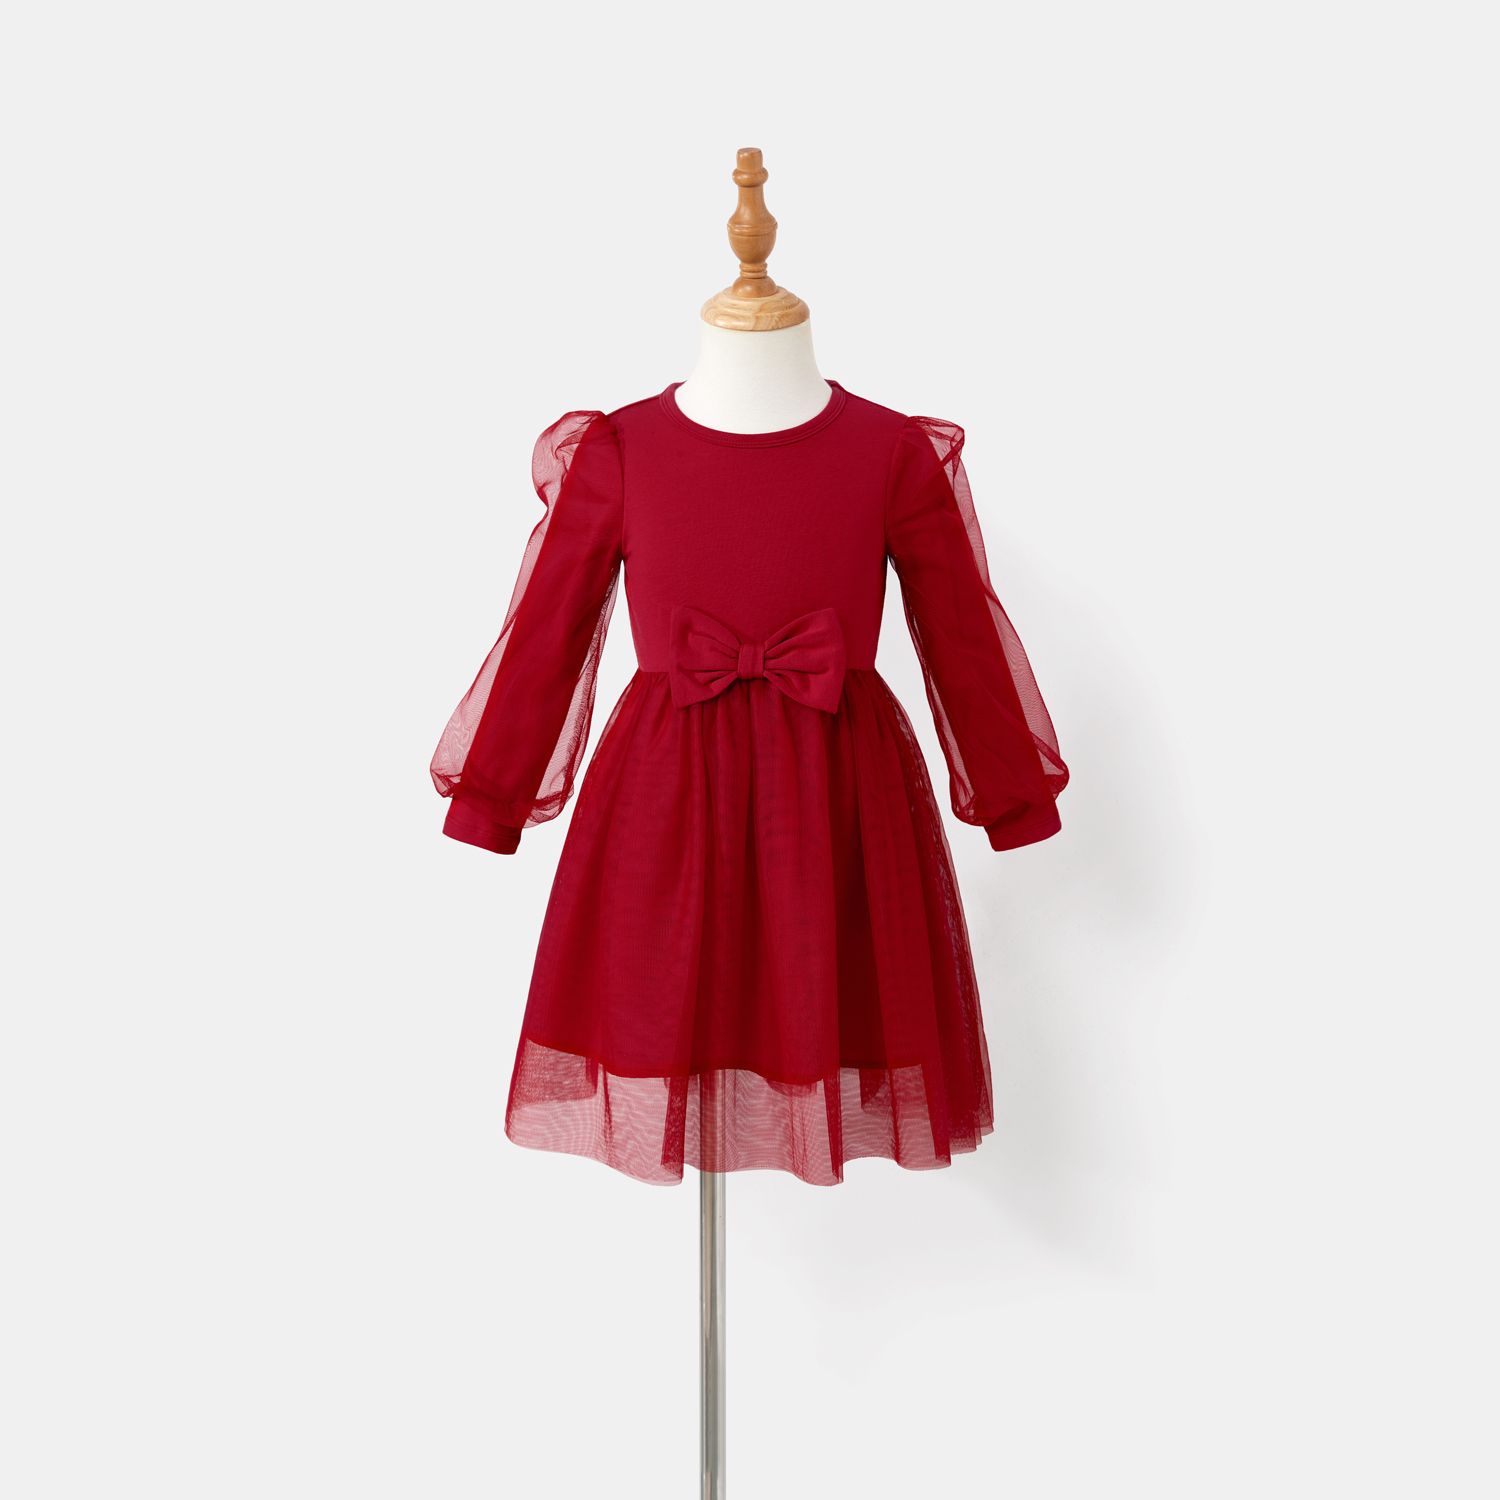 Valentine's Day Family Matching Plaid Shirt Tops And Red Mesh Splice Belted Dresses Sets